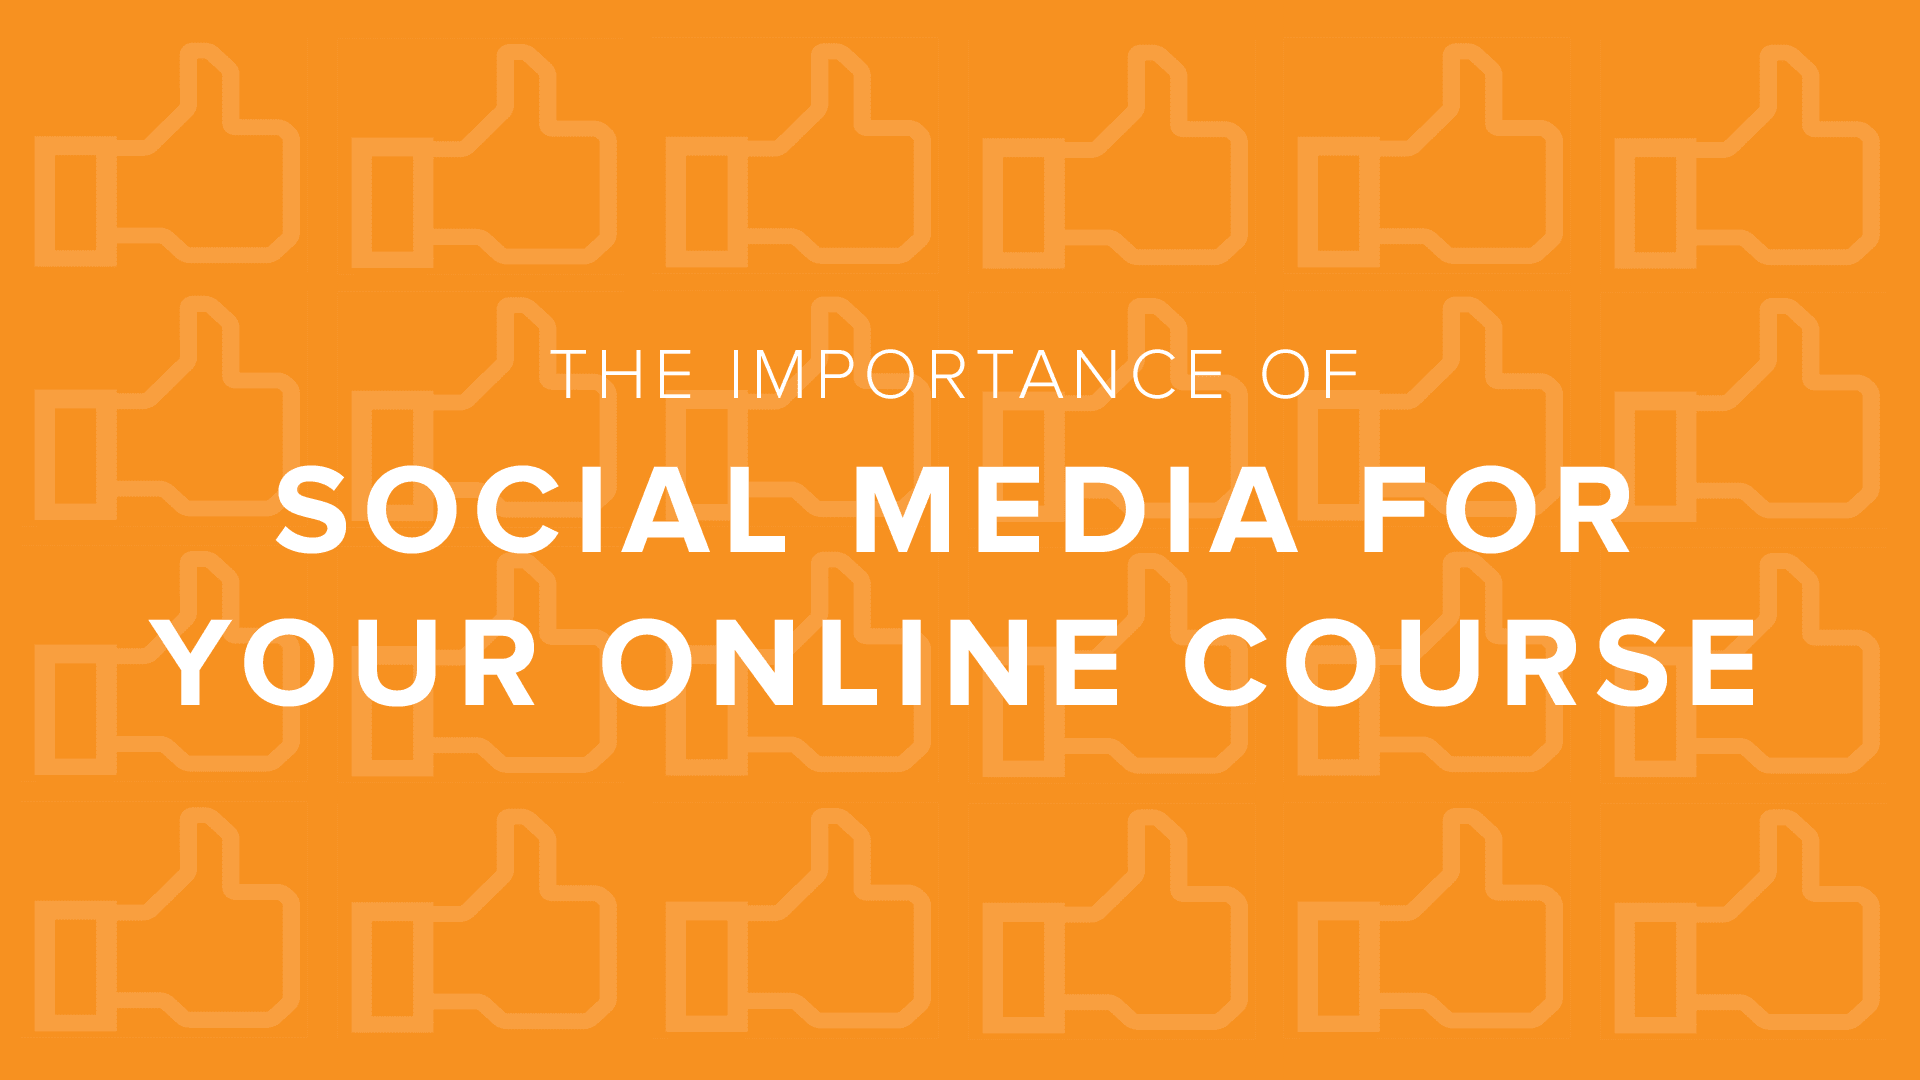 DigitalChalk: The Important of Social Media for Your Online Course